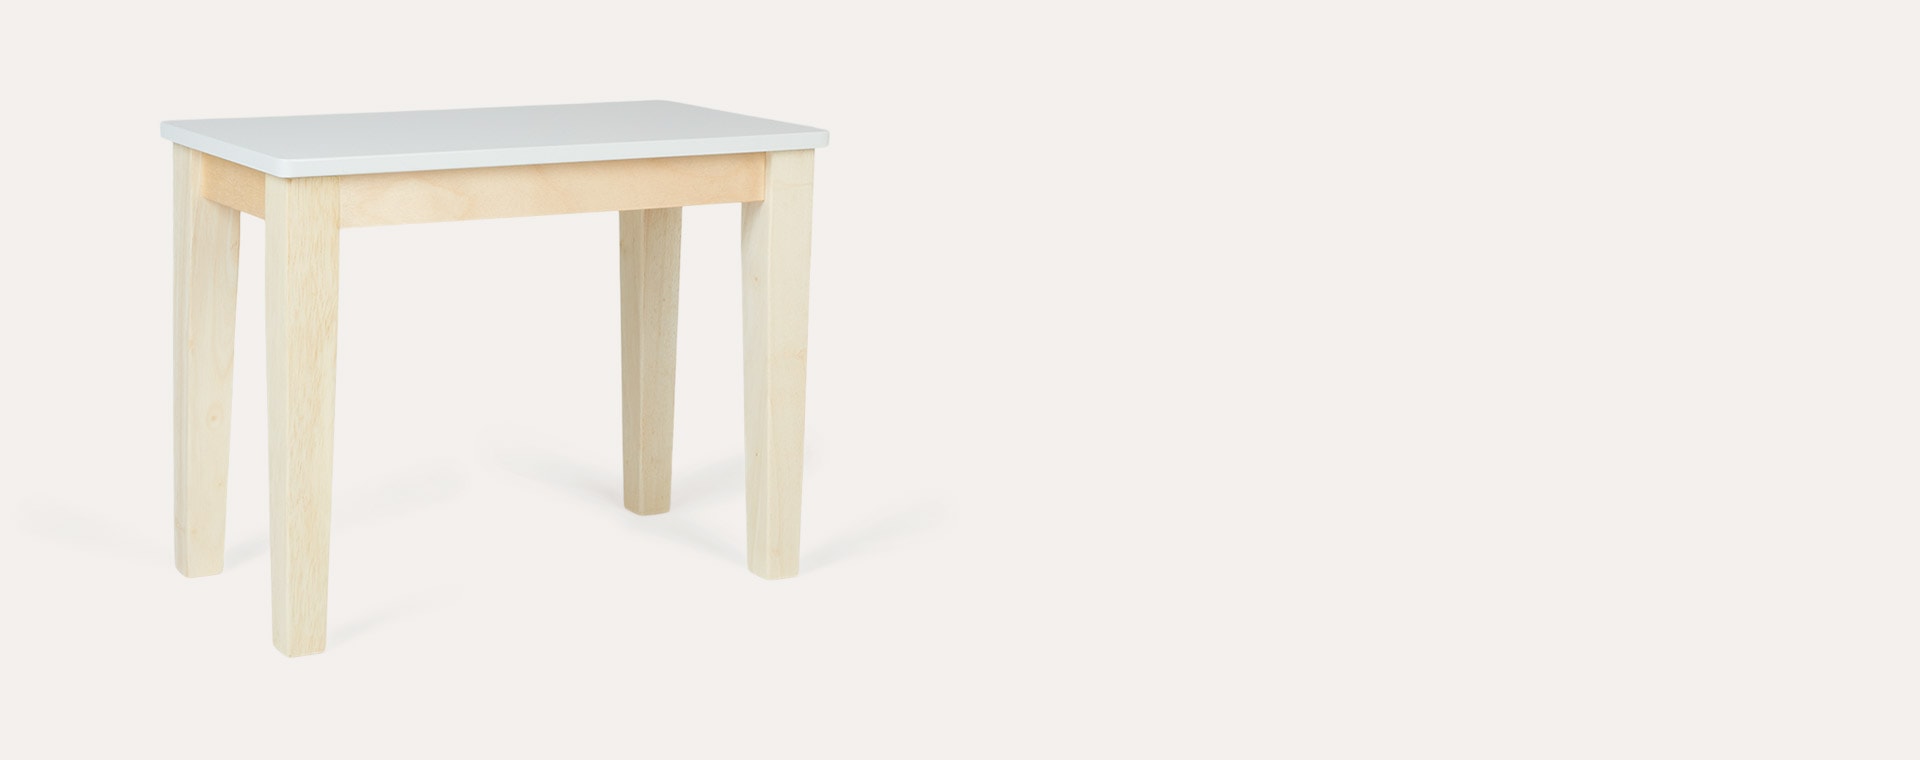 White Tender Leaf Toys Desk and Chair